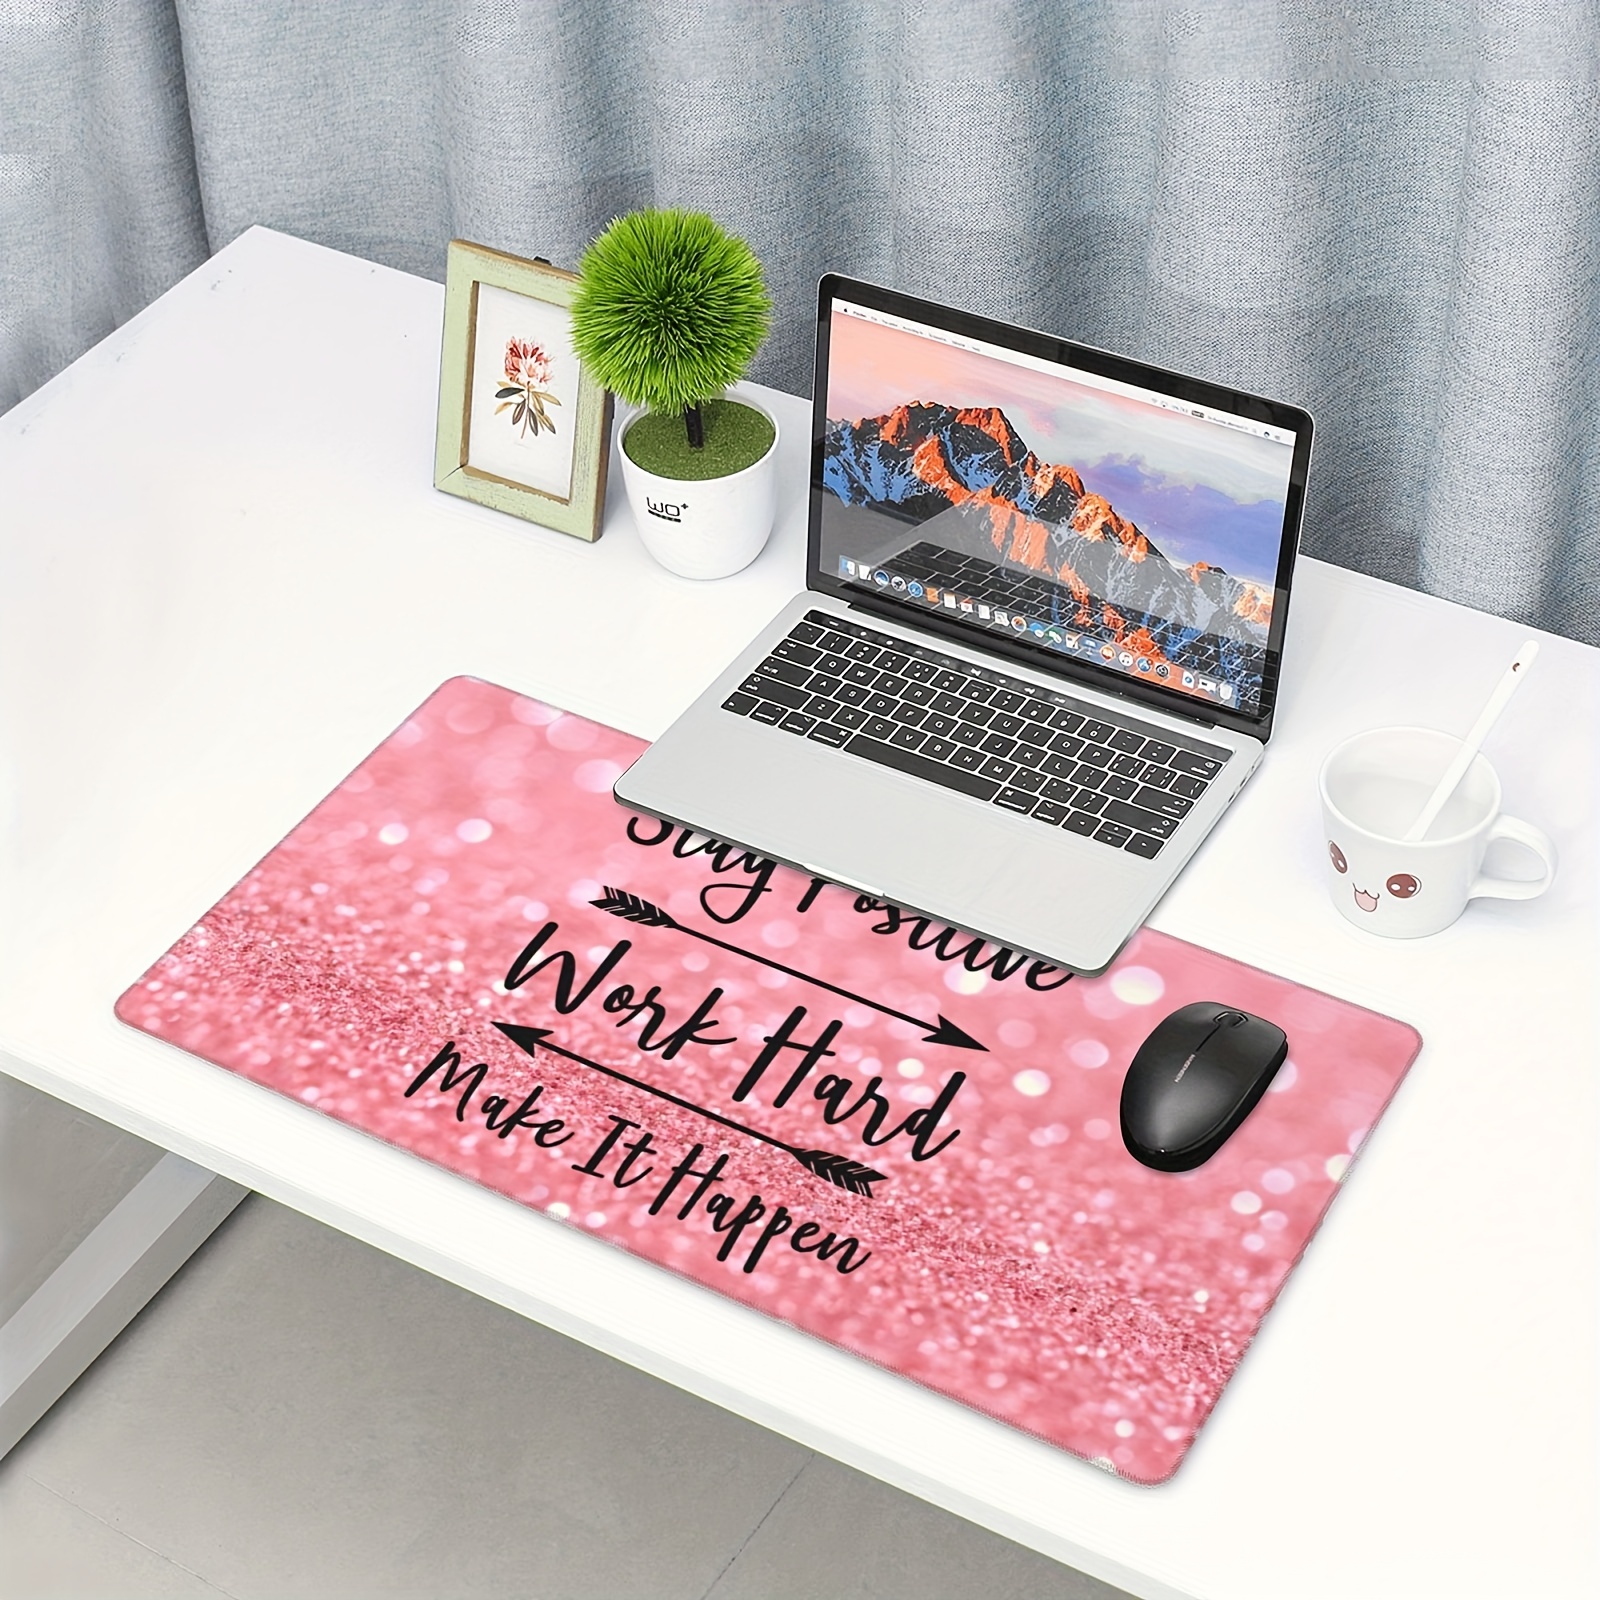 Large Extended Gaming Mouse Pad Mat, Stitched Edges Non-Slip Waterproof  Mousepad 